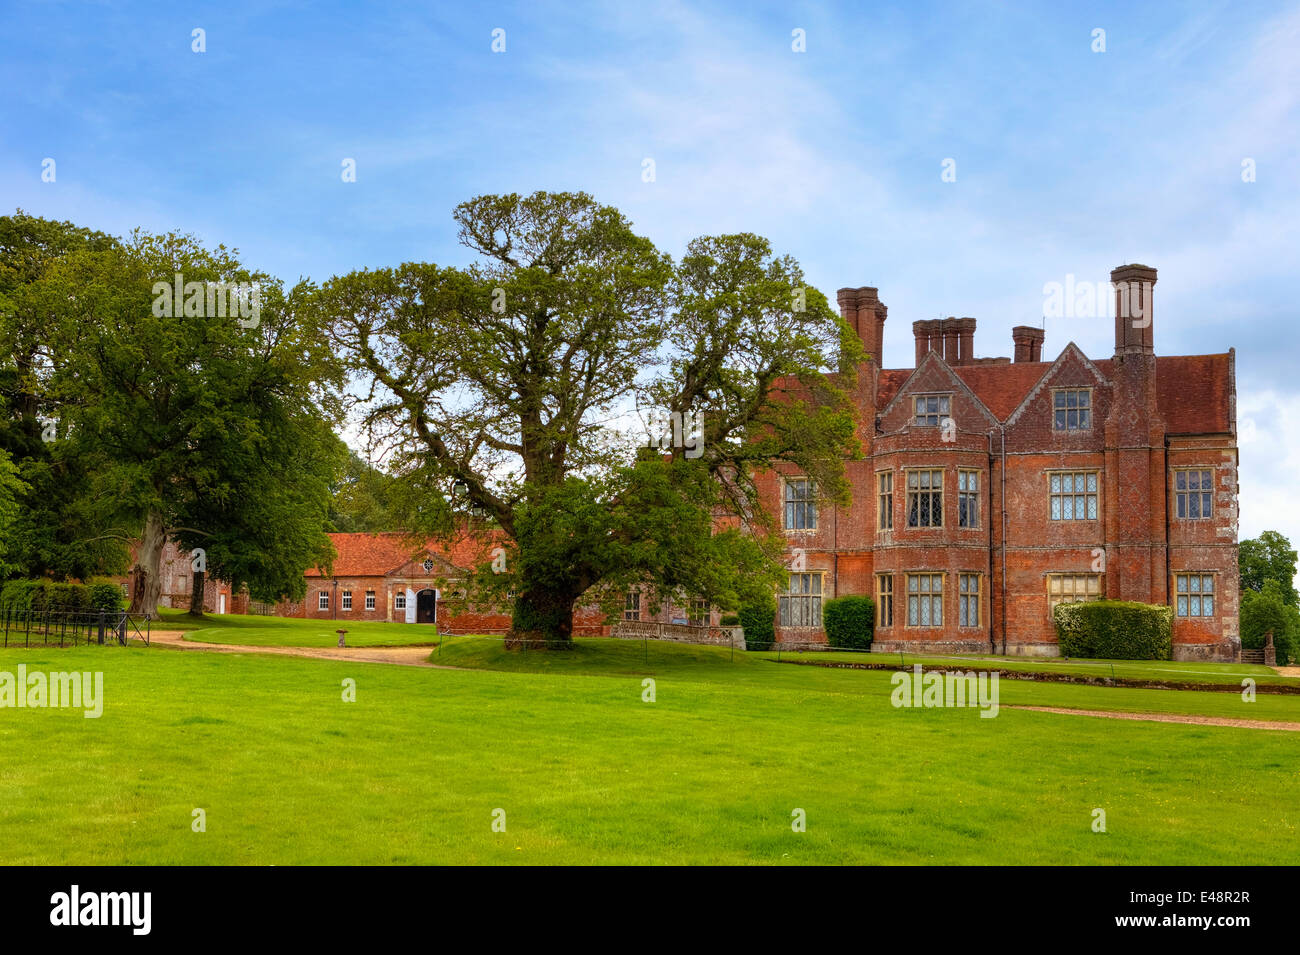 Breamore House, Breamore, Hampshire, Angleterre, Royaume-Uni Banque D'Images